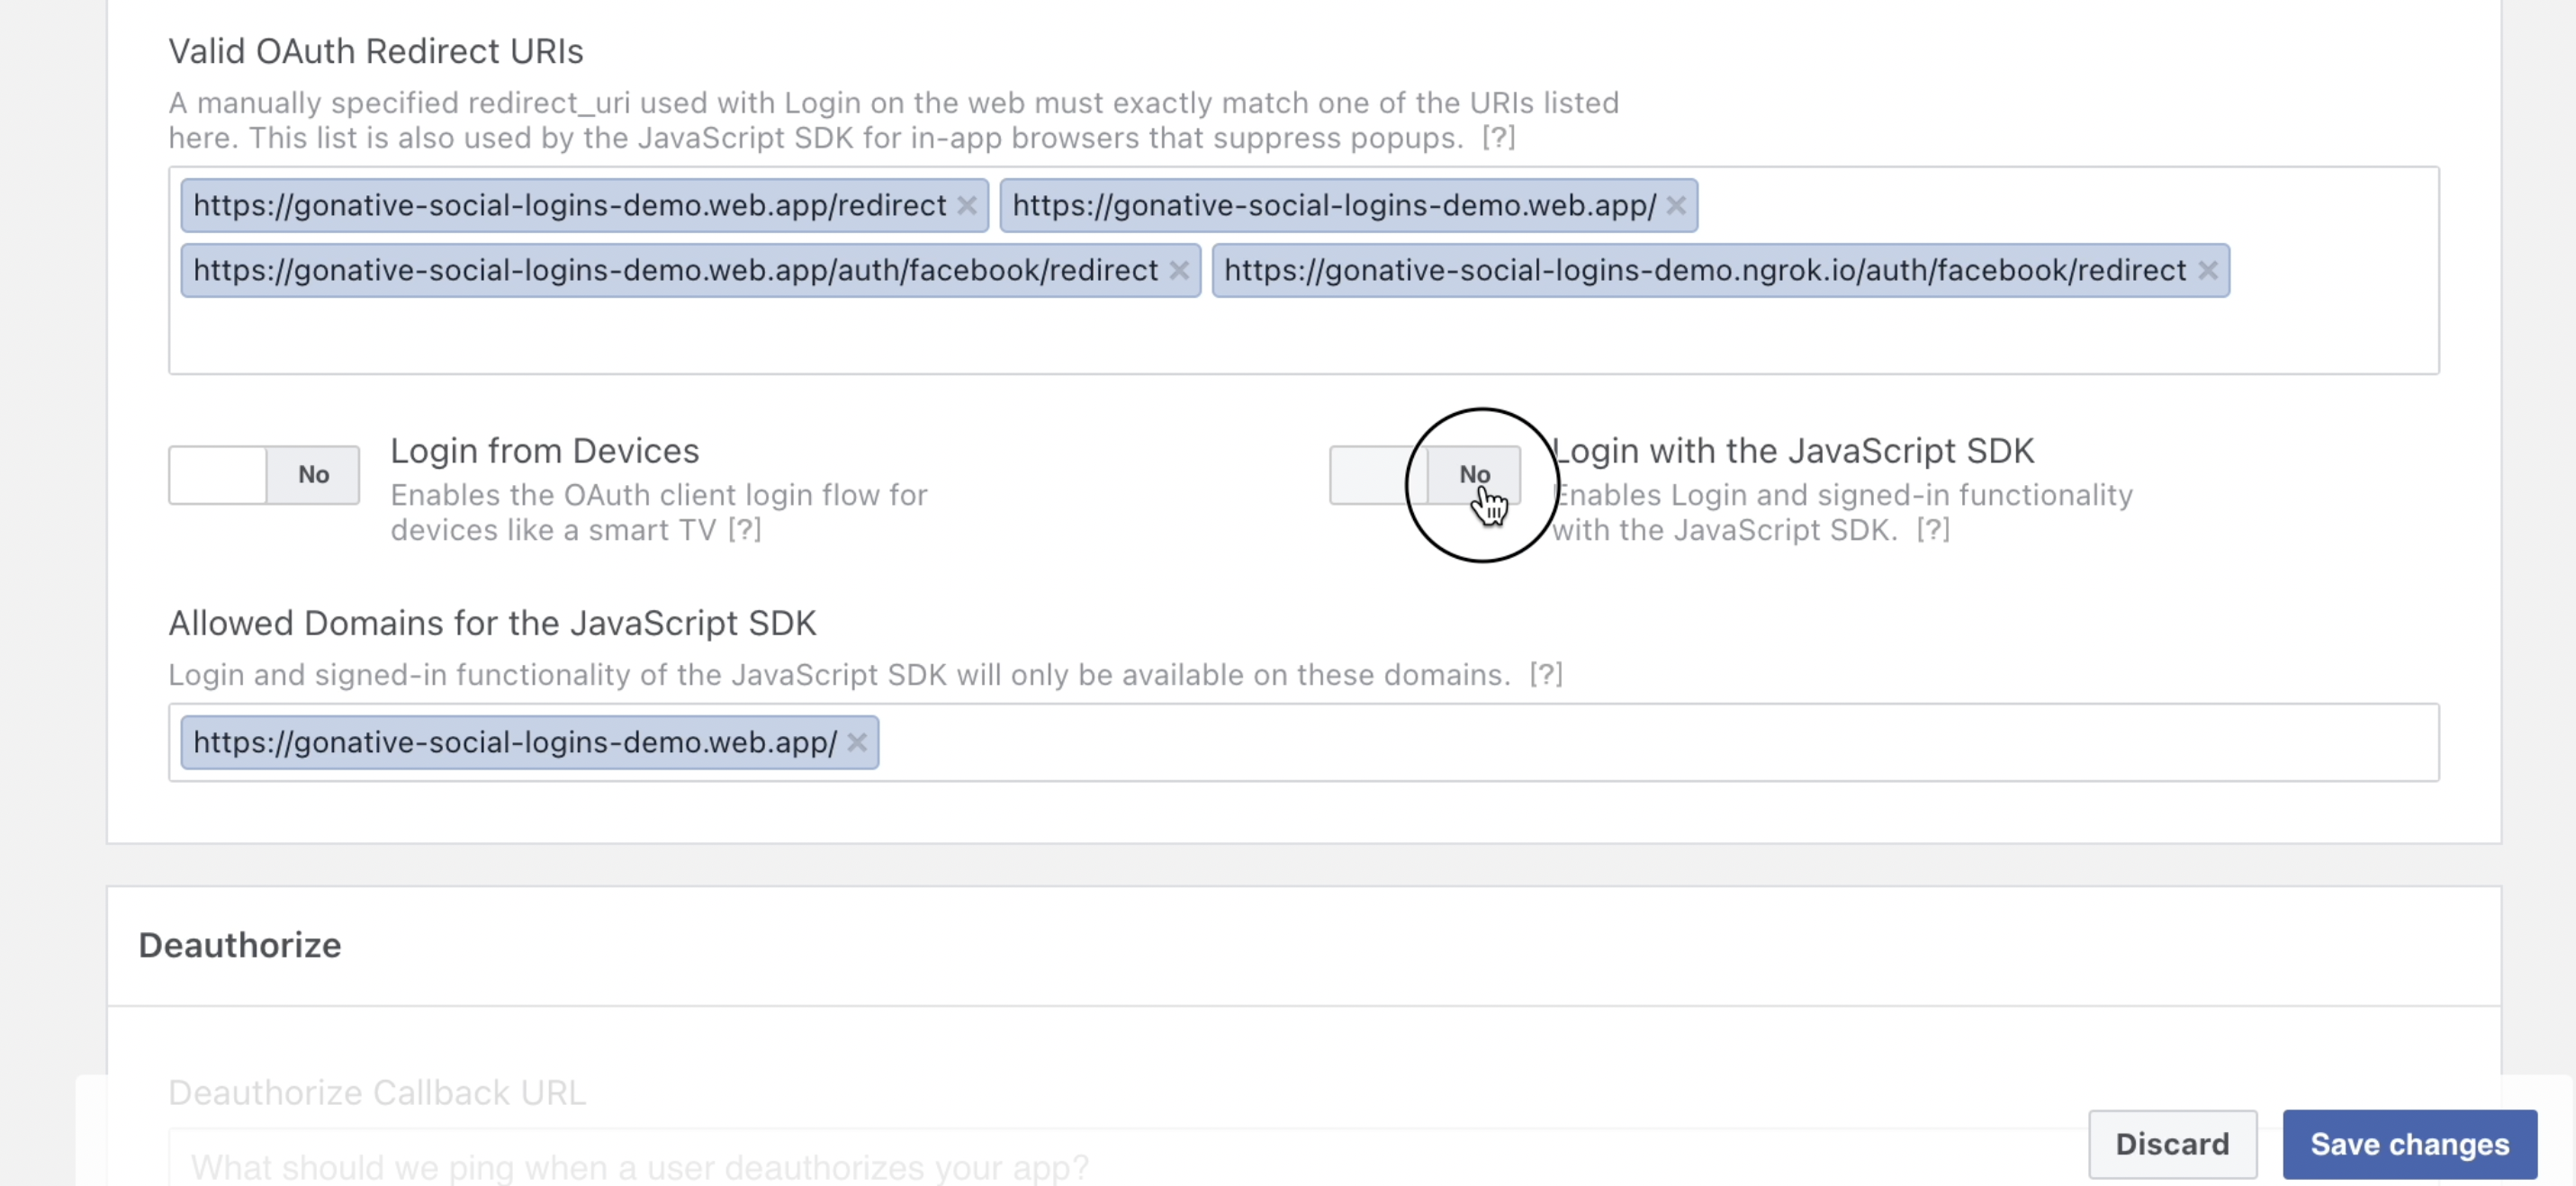 Enter Valid OAuth Redirect URIs and Enable “Login with the Javascript SDK"